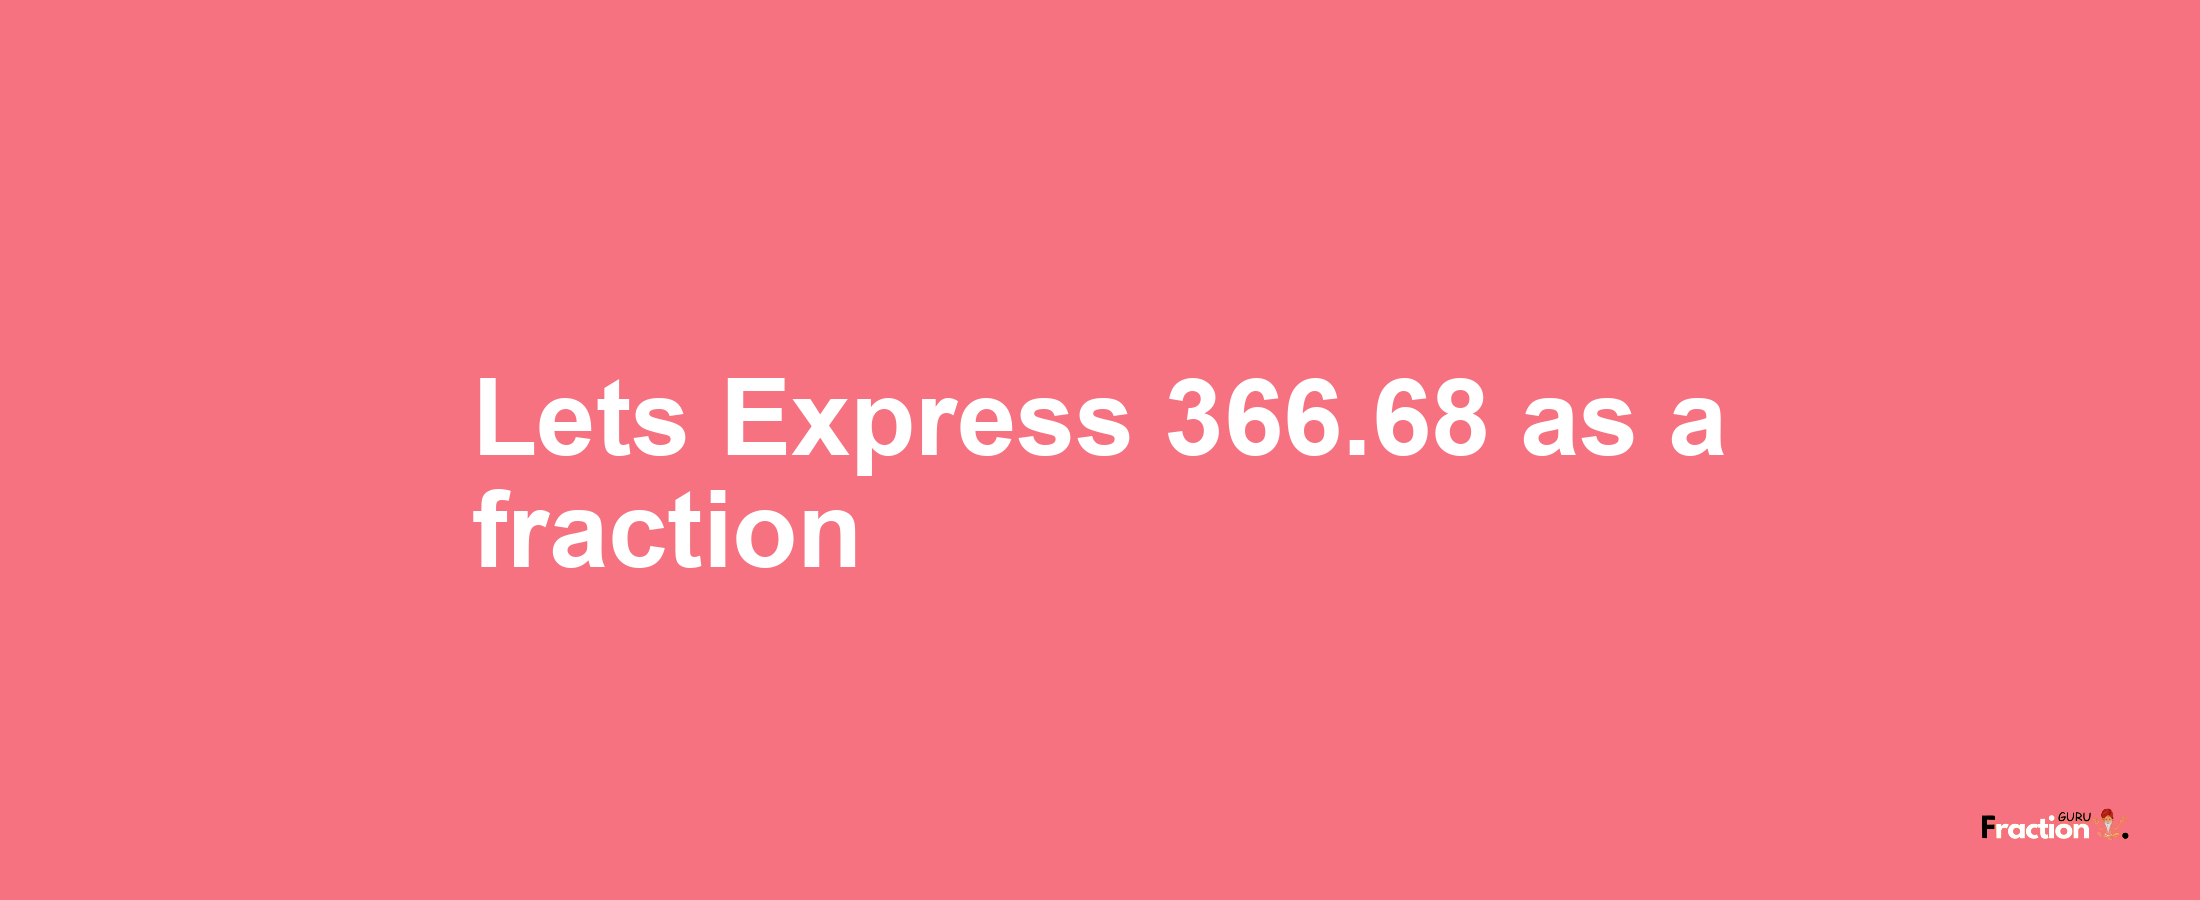 Lets Express 366.68 as afraction